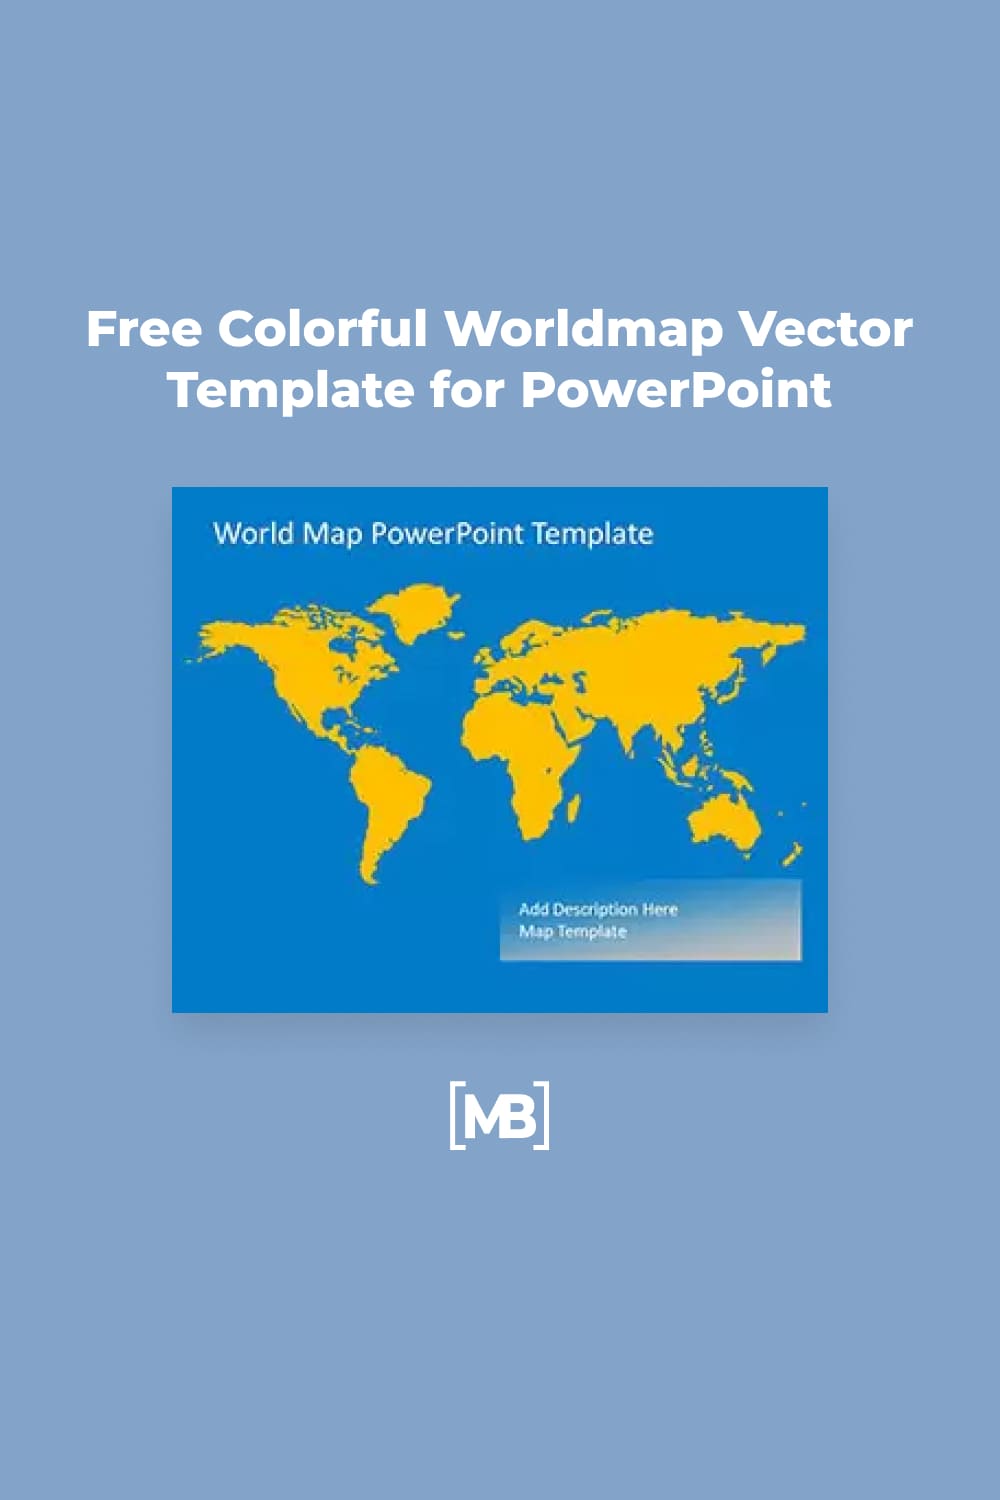 Free colorful worldmap vector template for powerpoint.